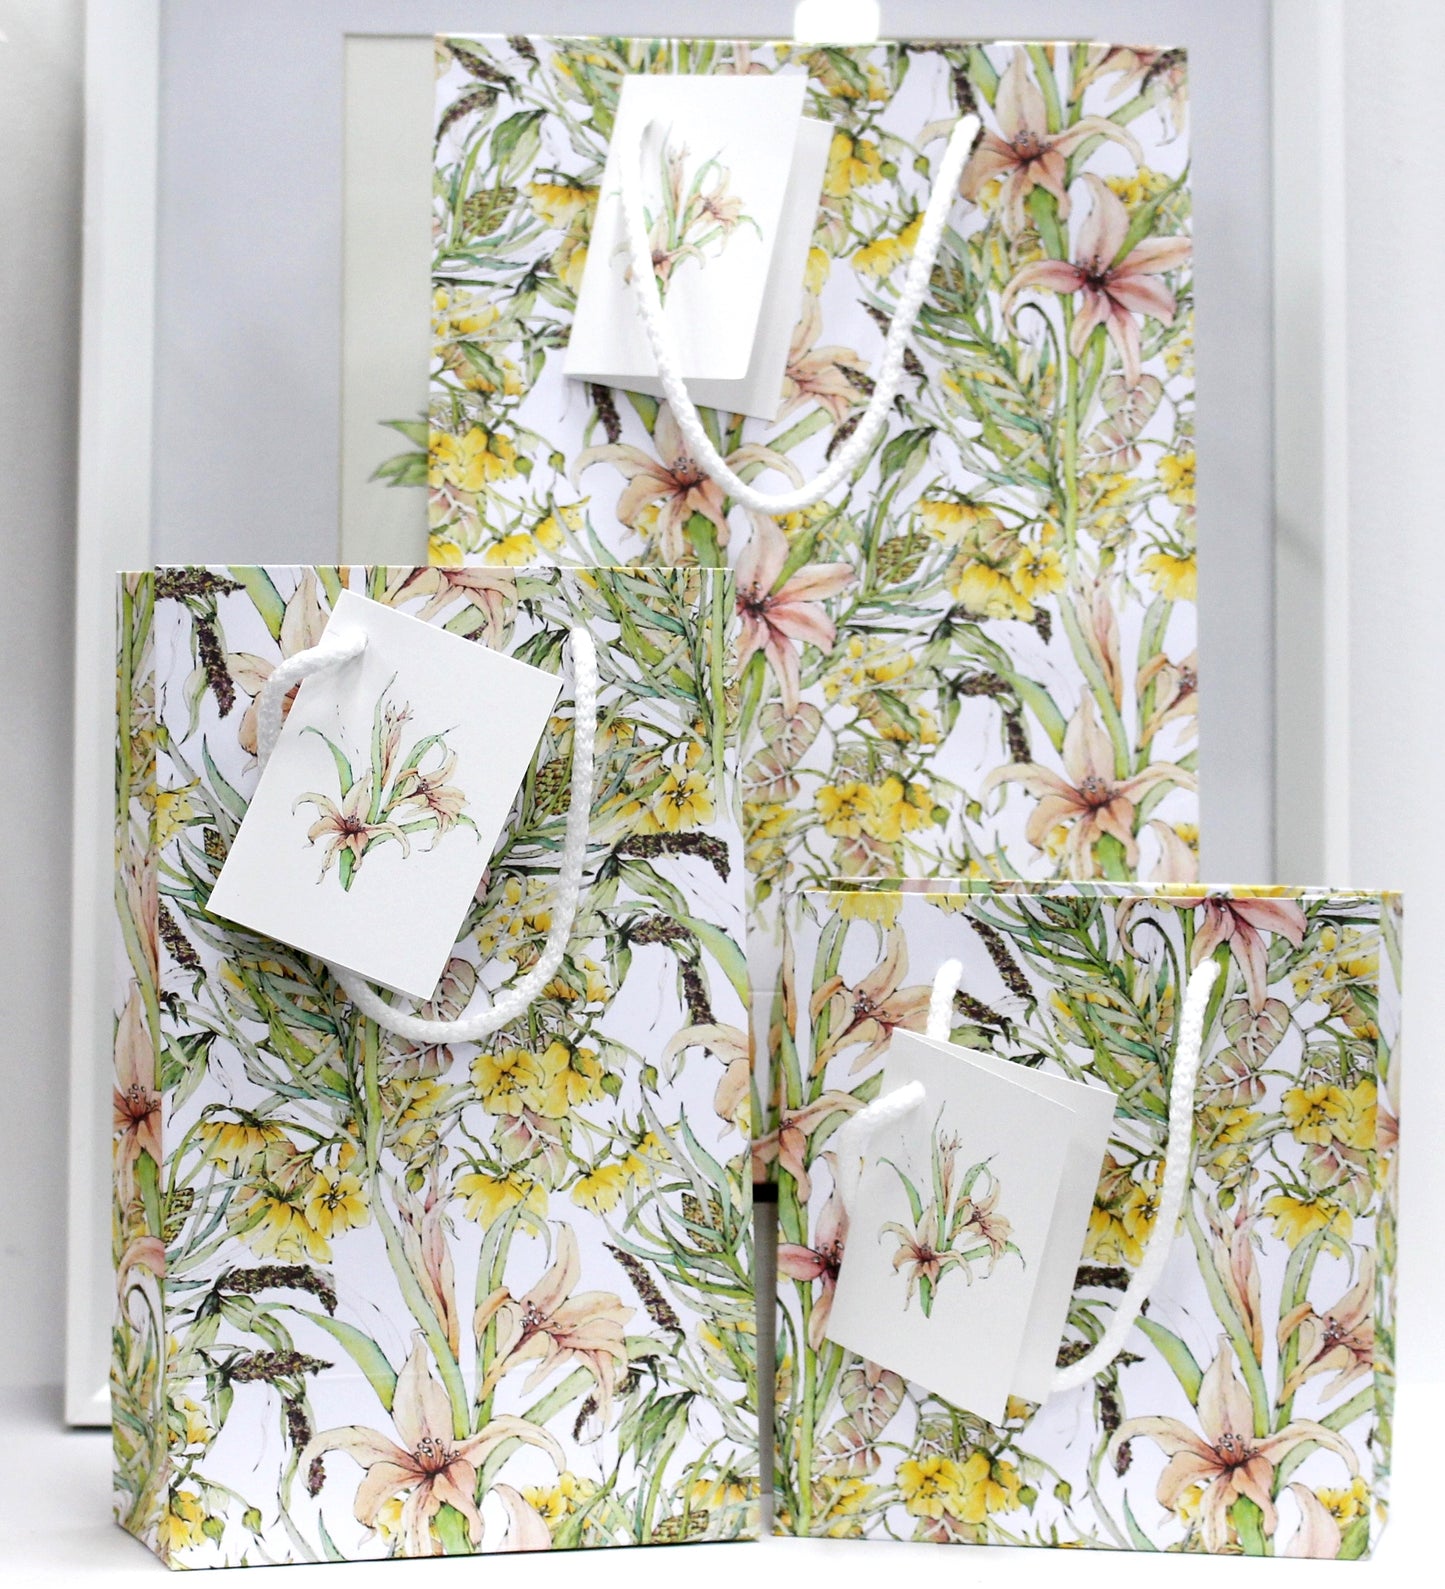 Peaches and Cream Lily Gift Bags